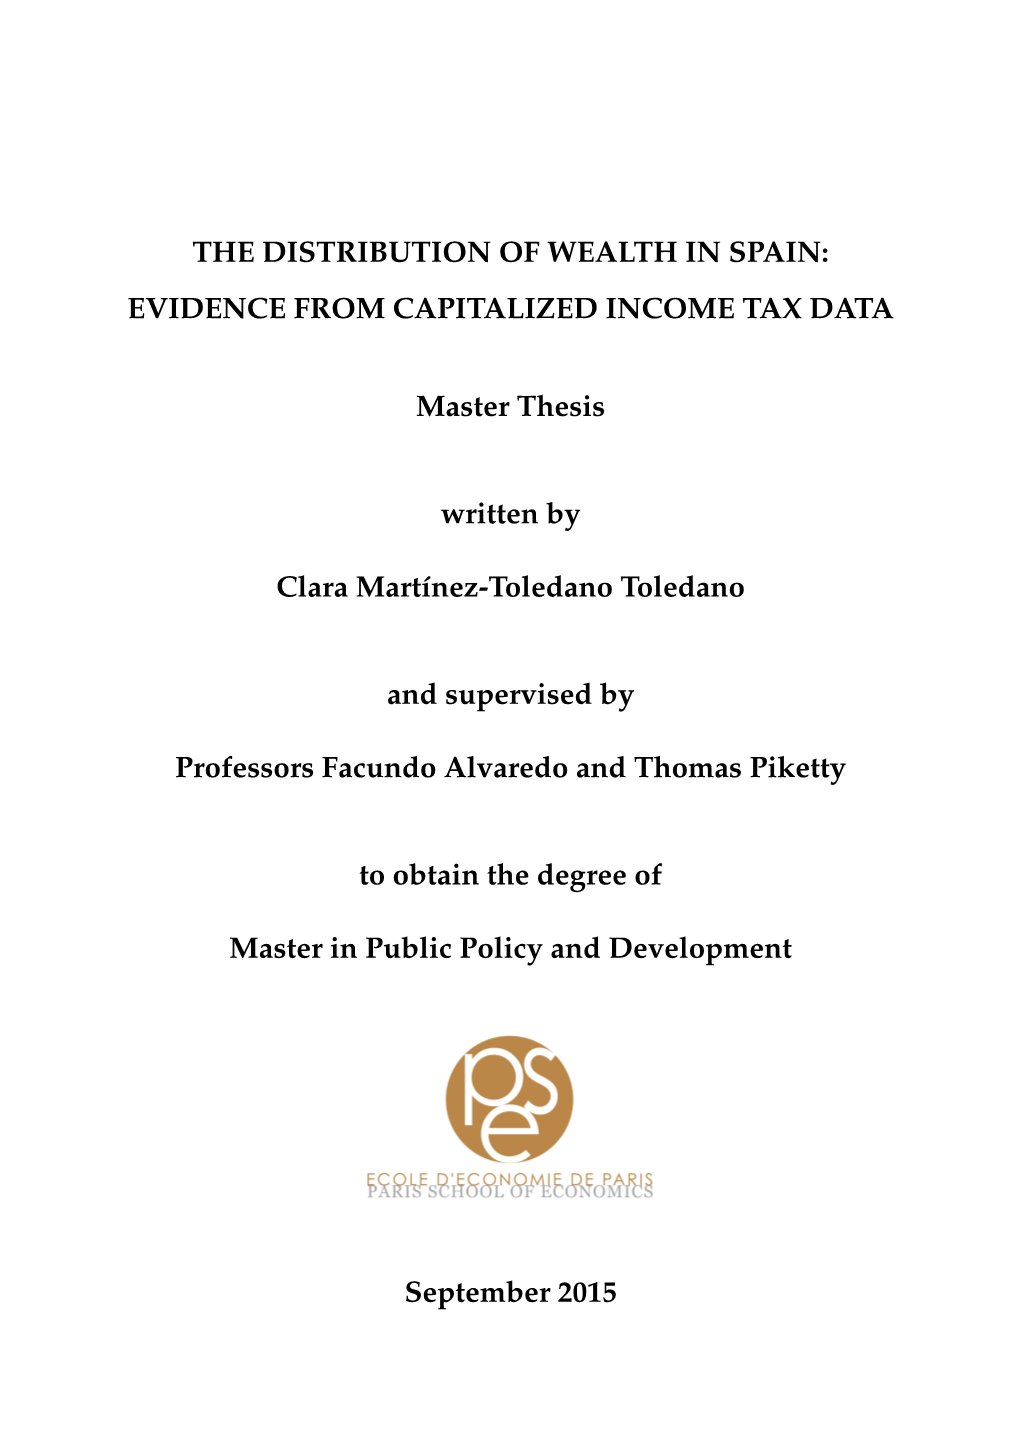 The Distribution of Wealth in Spain: Evidence from Capitalized Income Tax Data